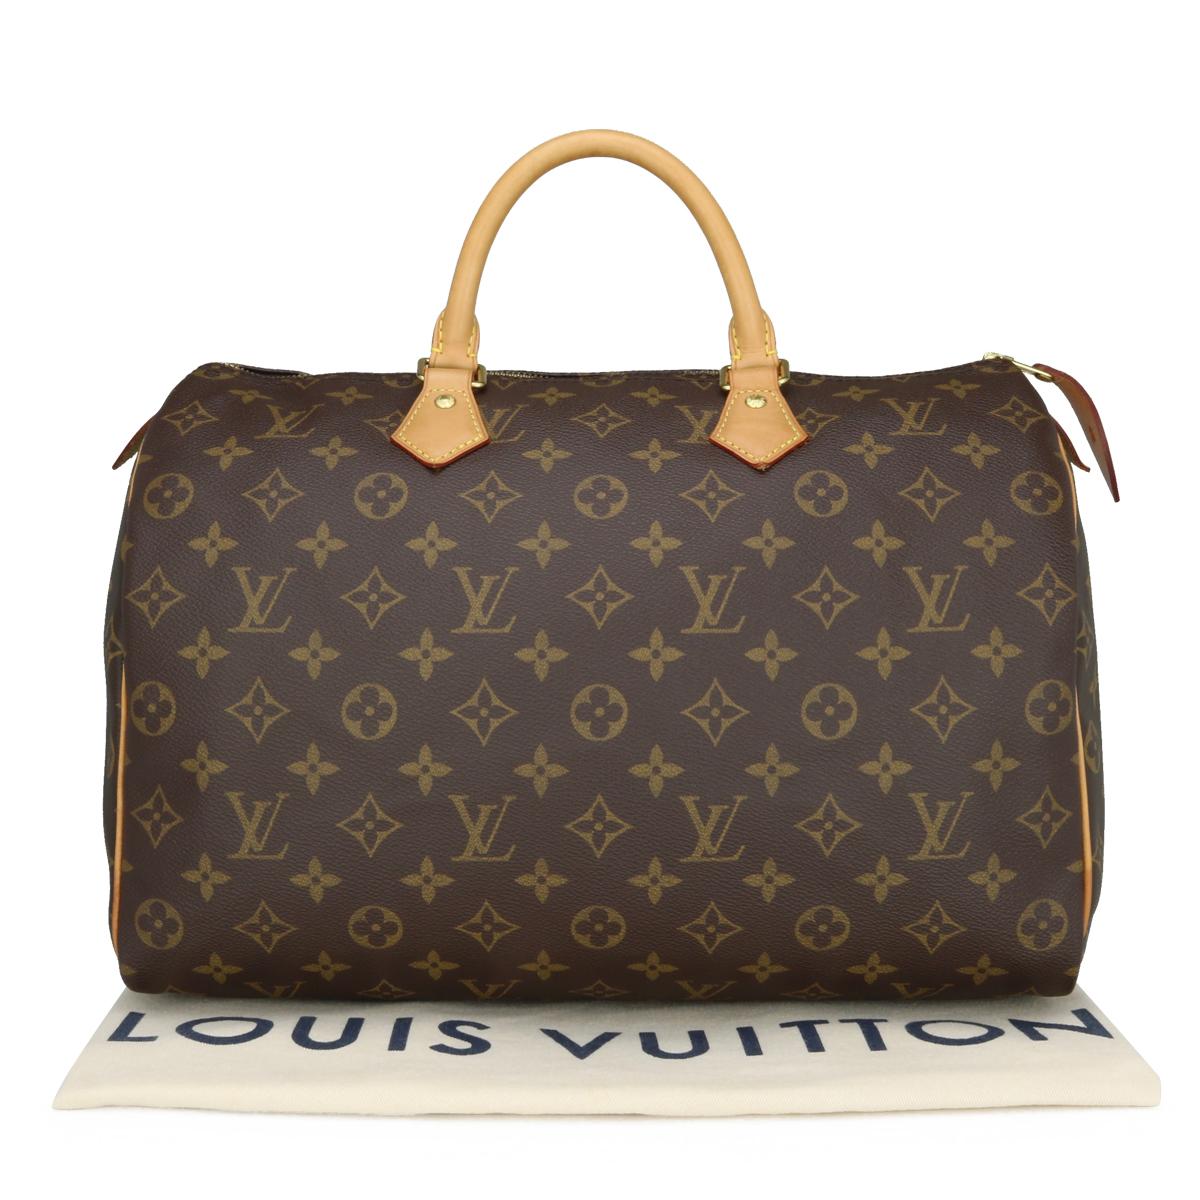 Louis Vuitton Speedy 35 Bag in Monogram with Gold Hardware 2018.

This bag is in excellent condition. 

- Exterior Condition: Excellent condition. Light storage creasing to the canvas. Very minor leather/print surface wear to four base corners,